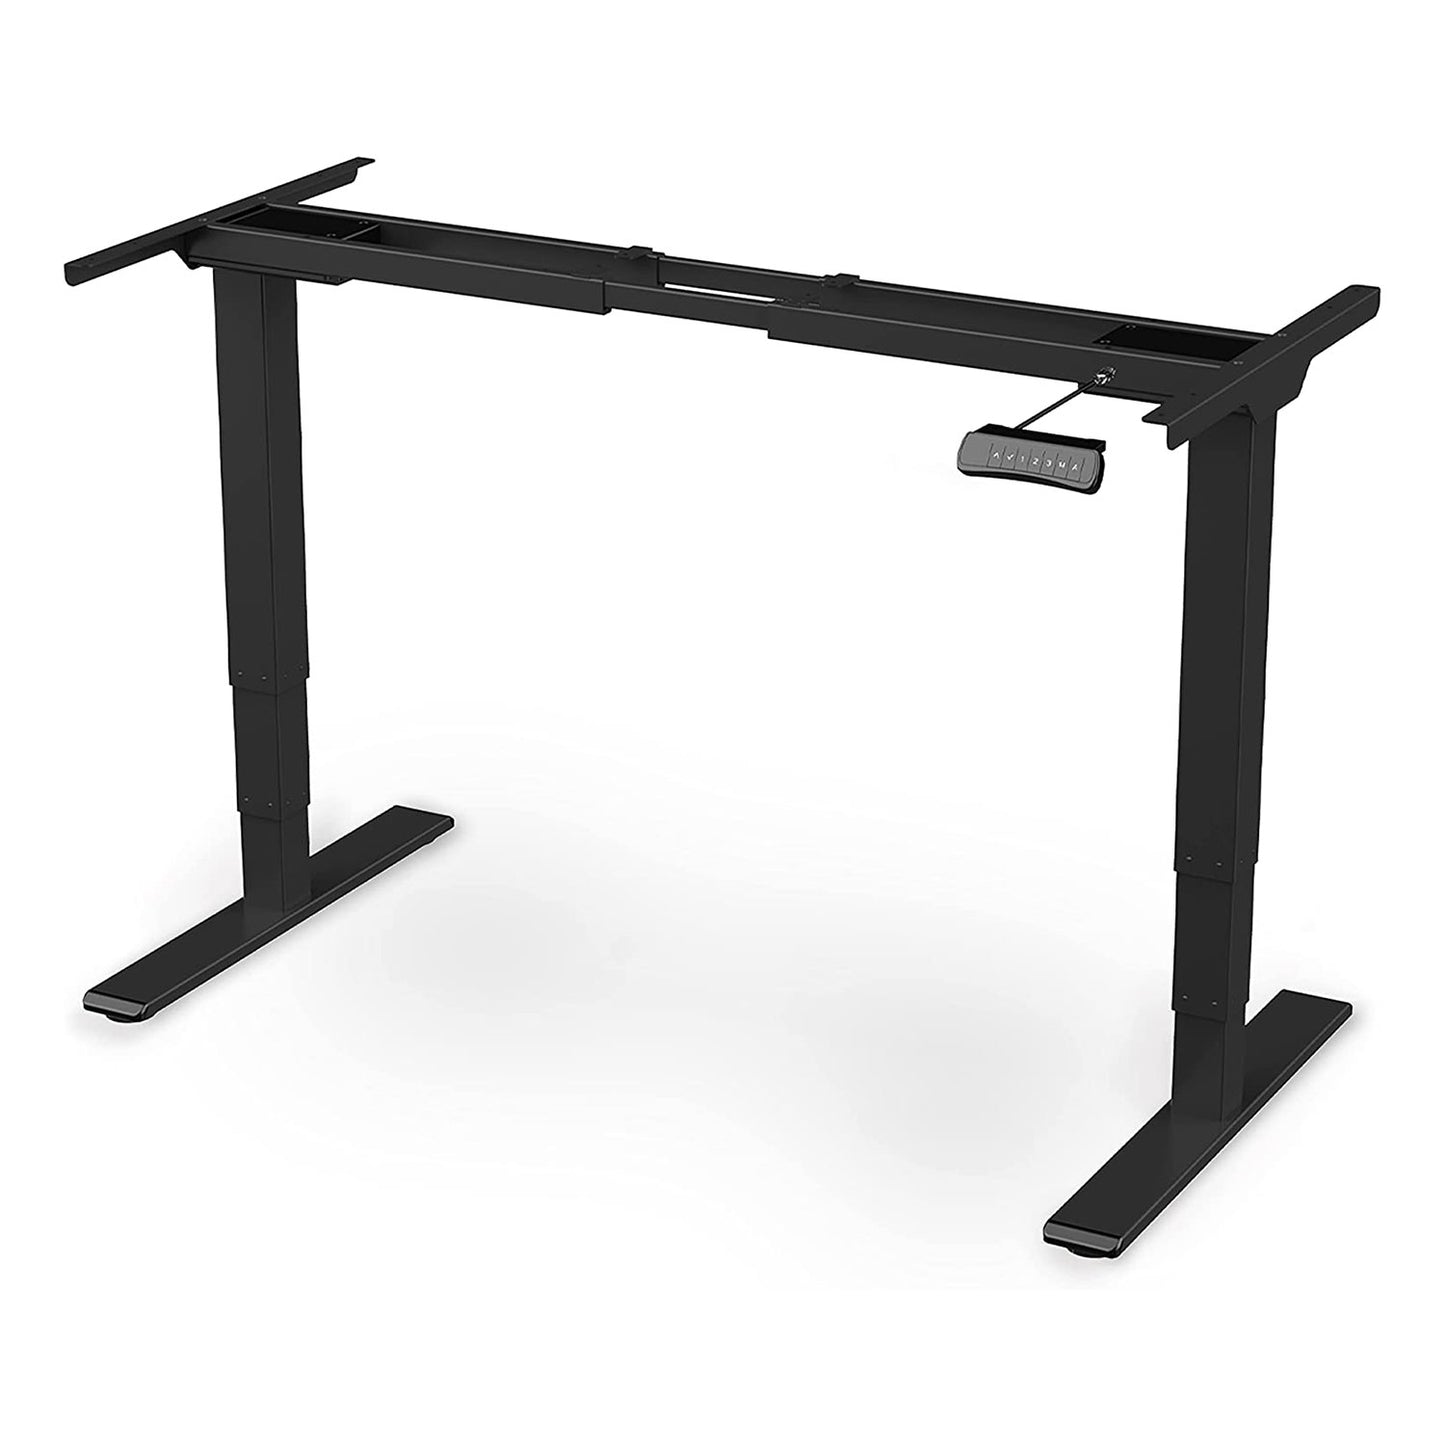 Height-adjustable desk from the SportPlus brand